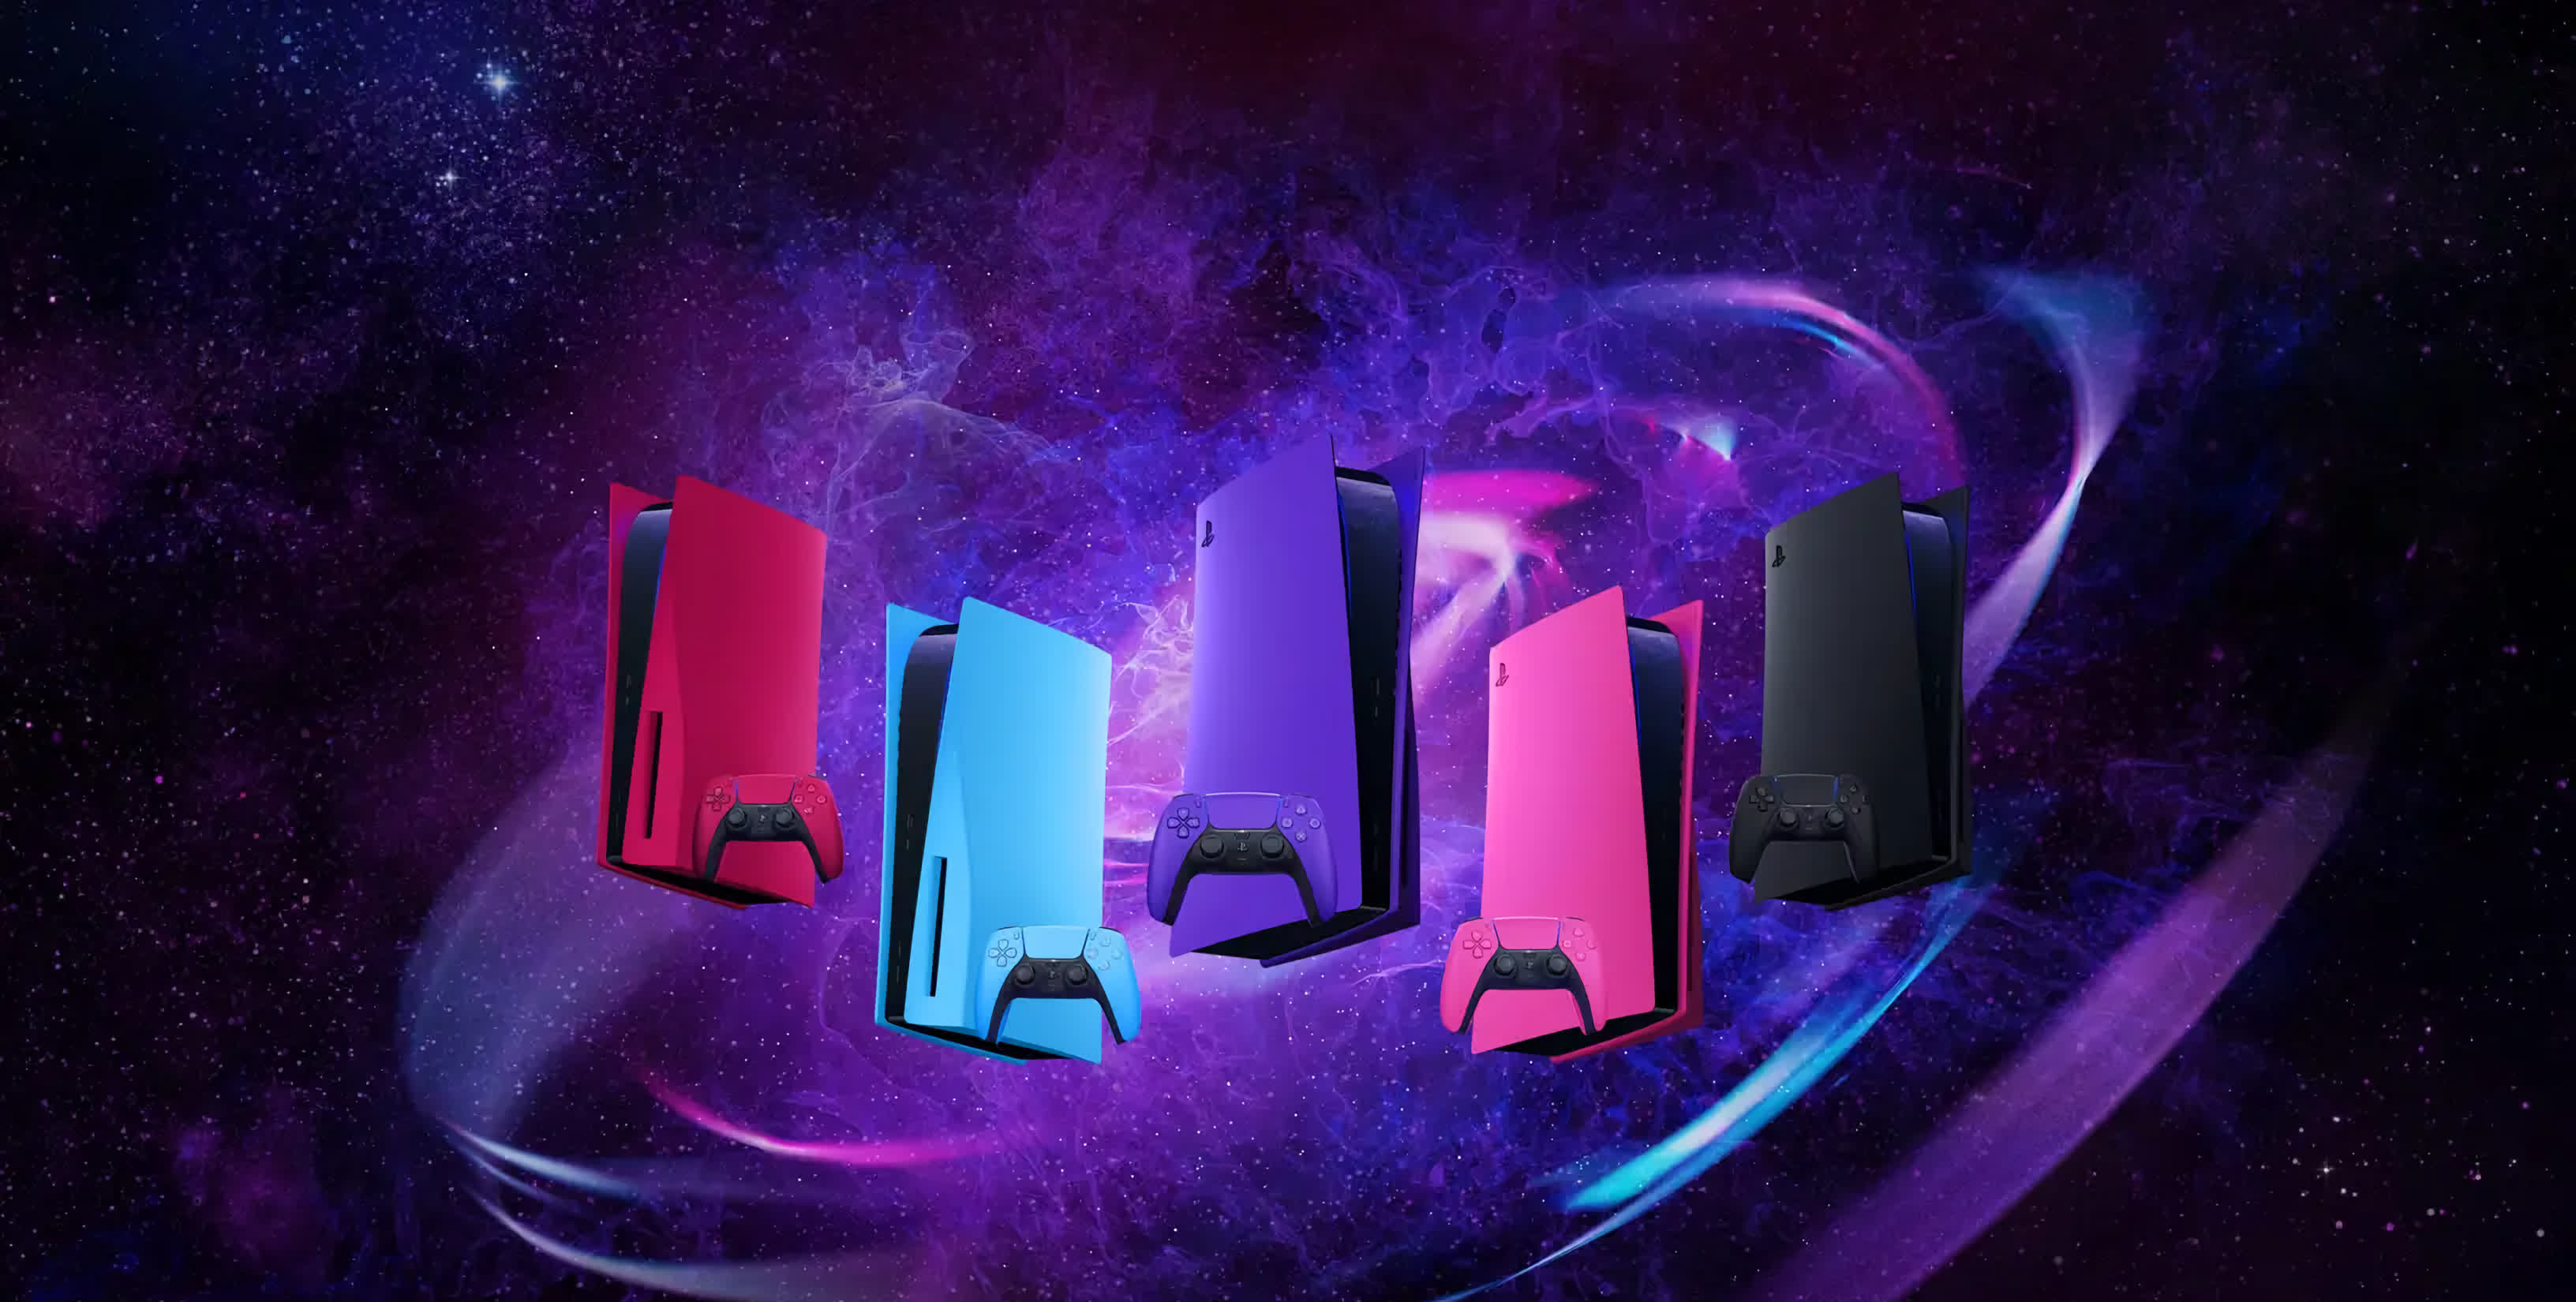 Sony is officially launching PlayStation 5 covers in various colors to customize your console